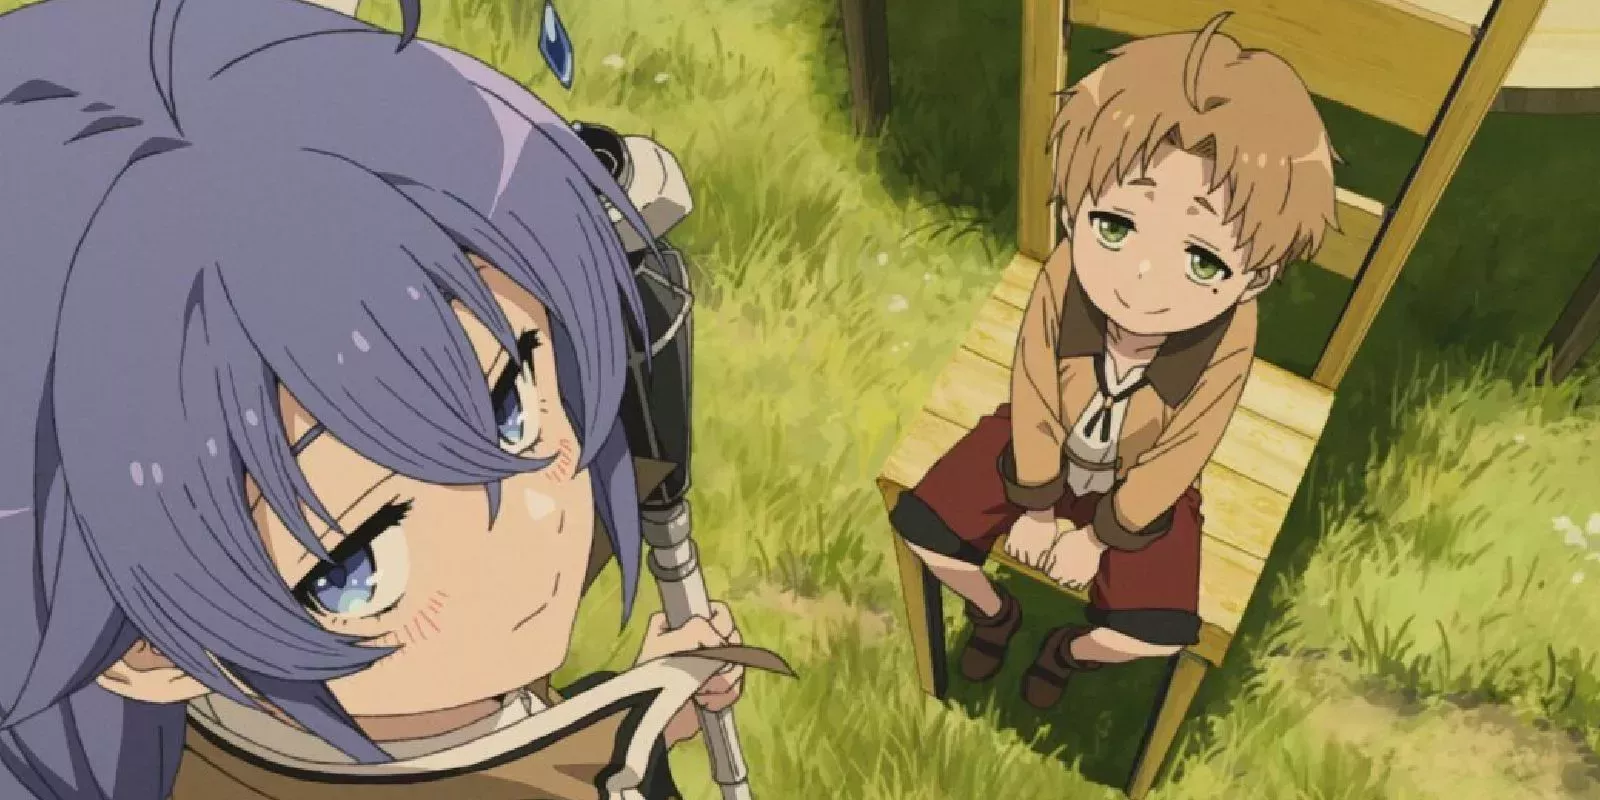 Rudeus as a child and Roxy looking judgingly in Mushoku Tensei